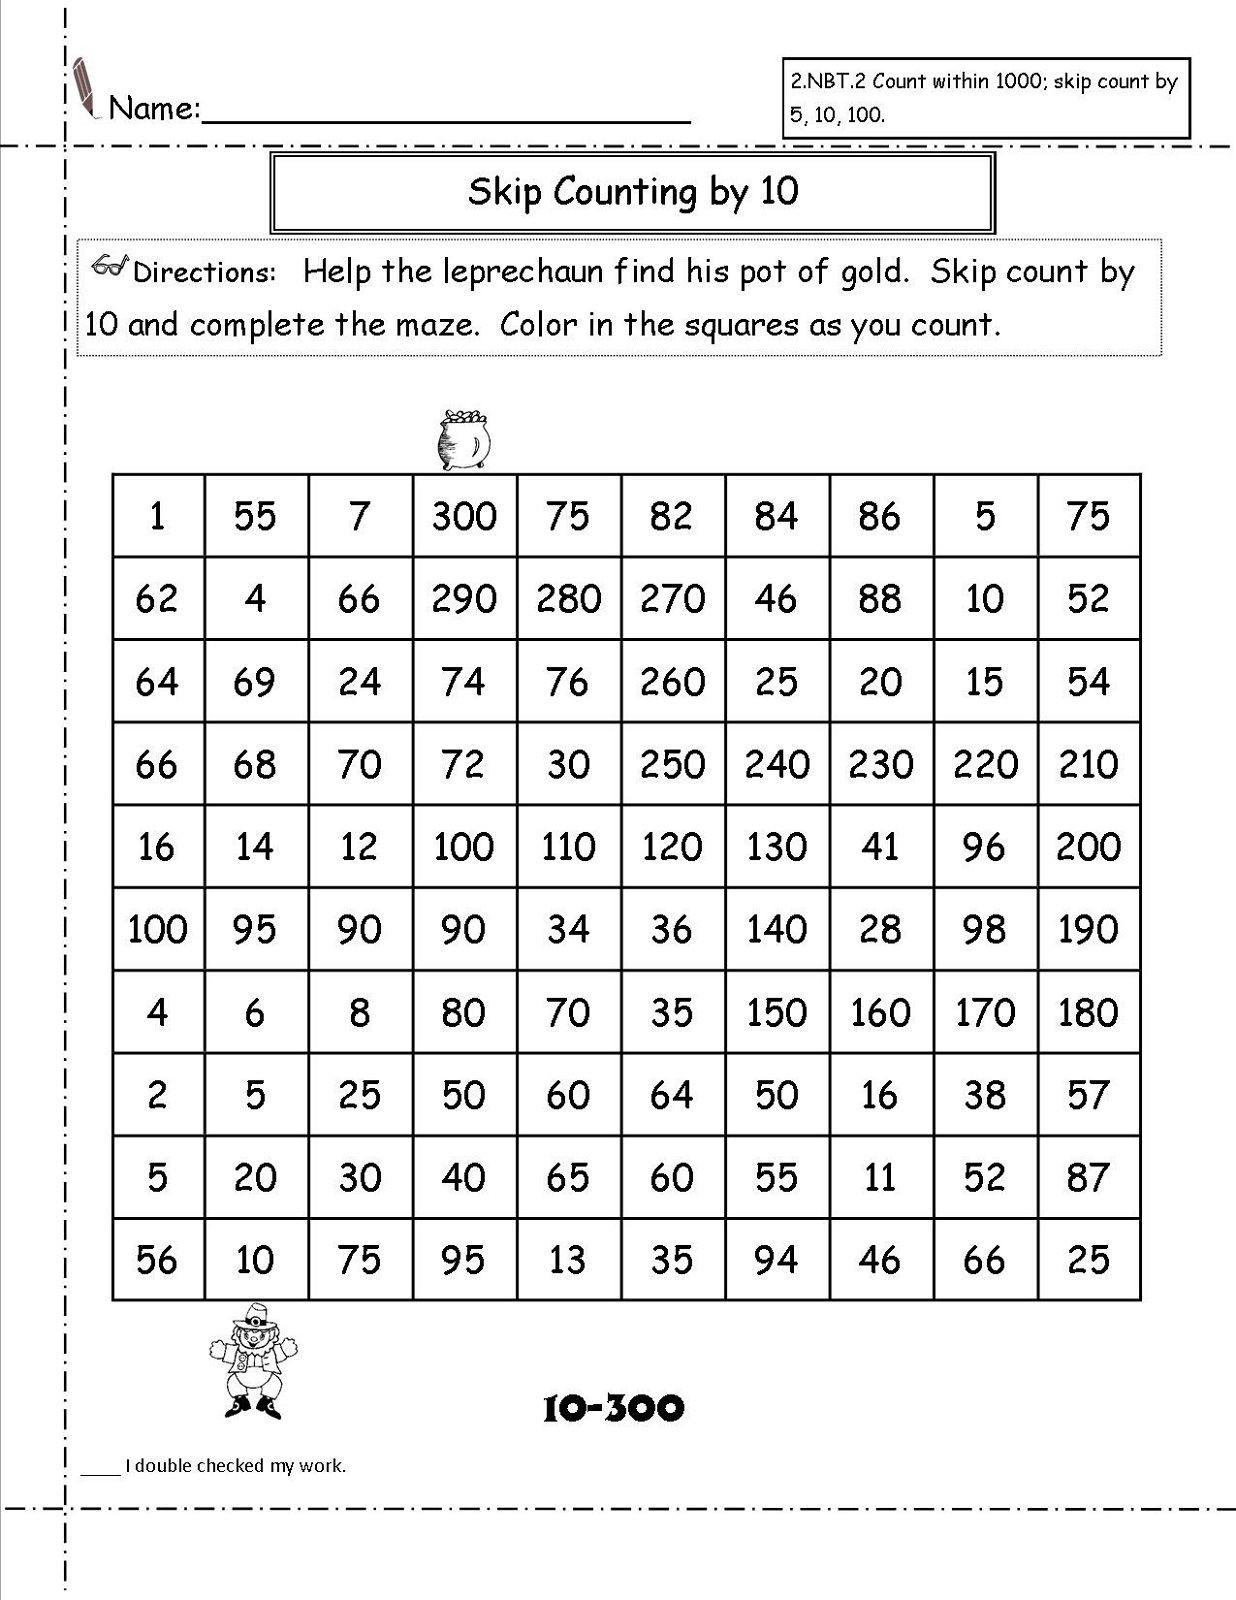 Counting In 10s Worksheet Count by 10s Worksheets